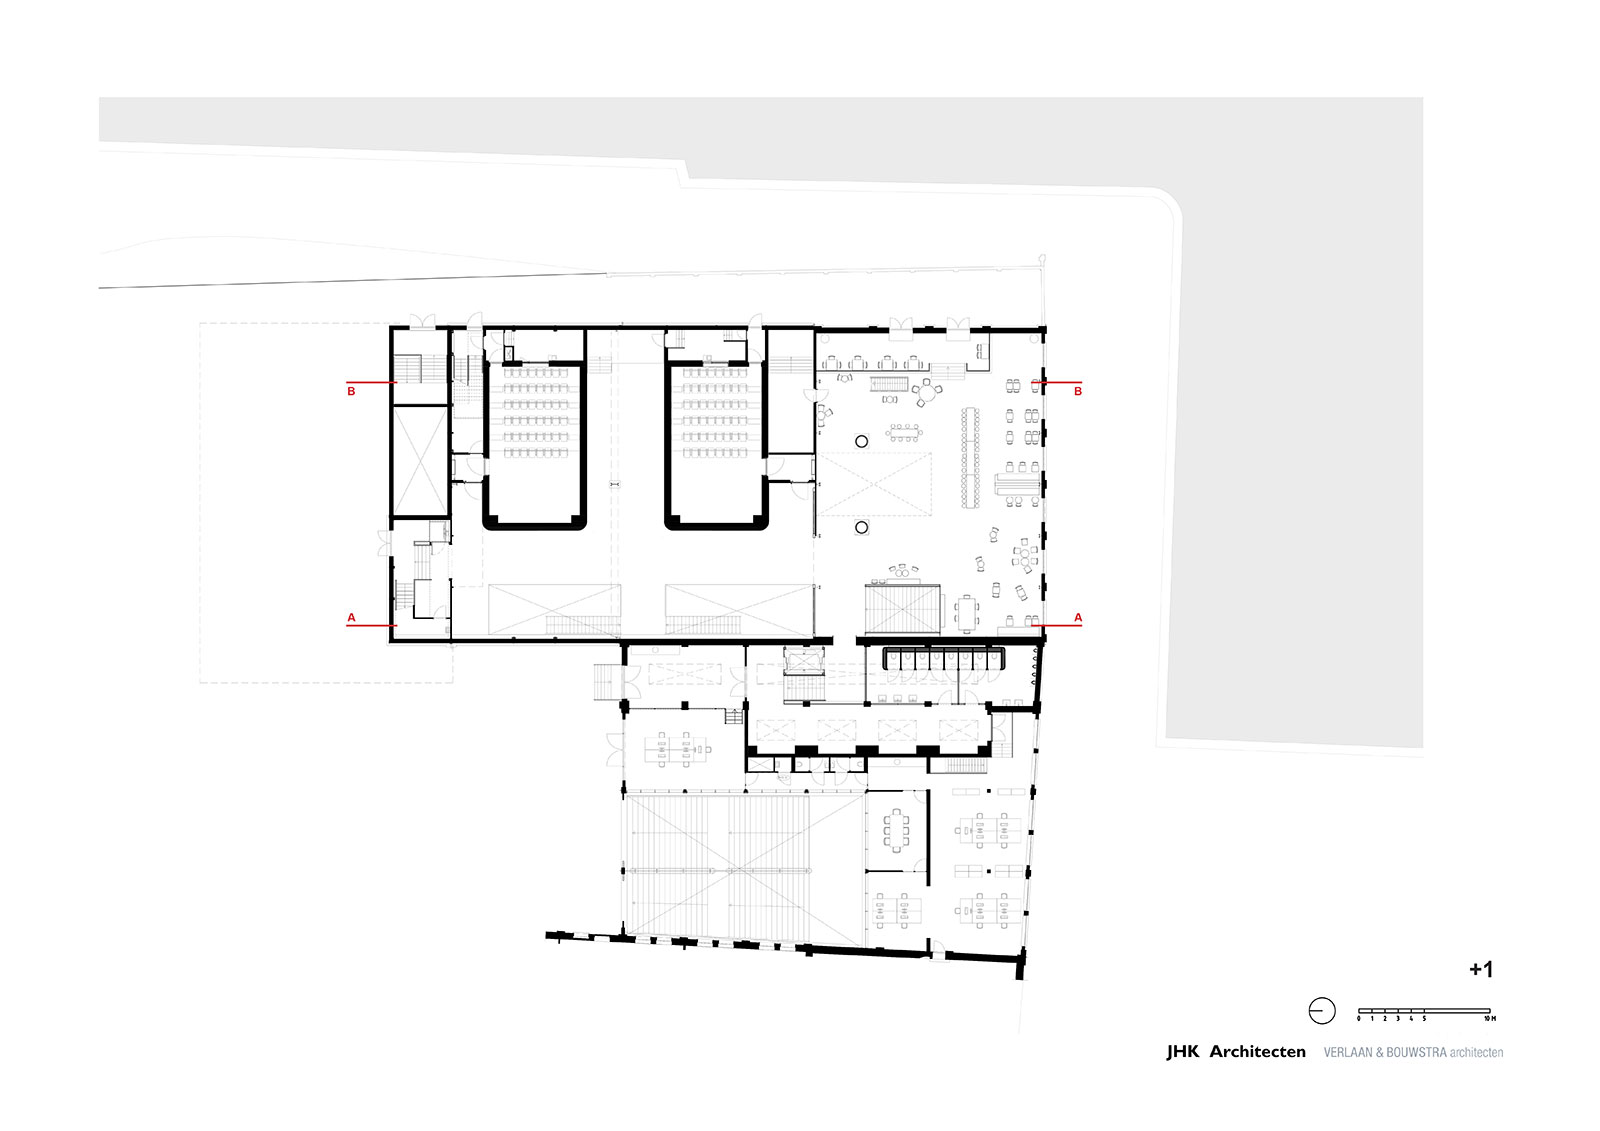 JHKVB Lumiere Cinema Maastricht floorplans and sections 1